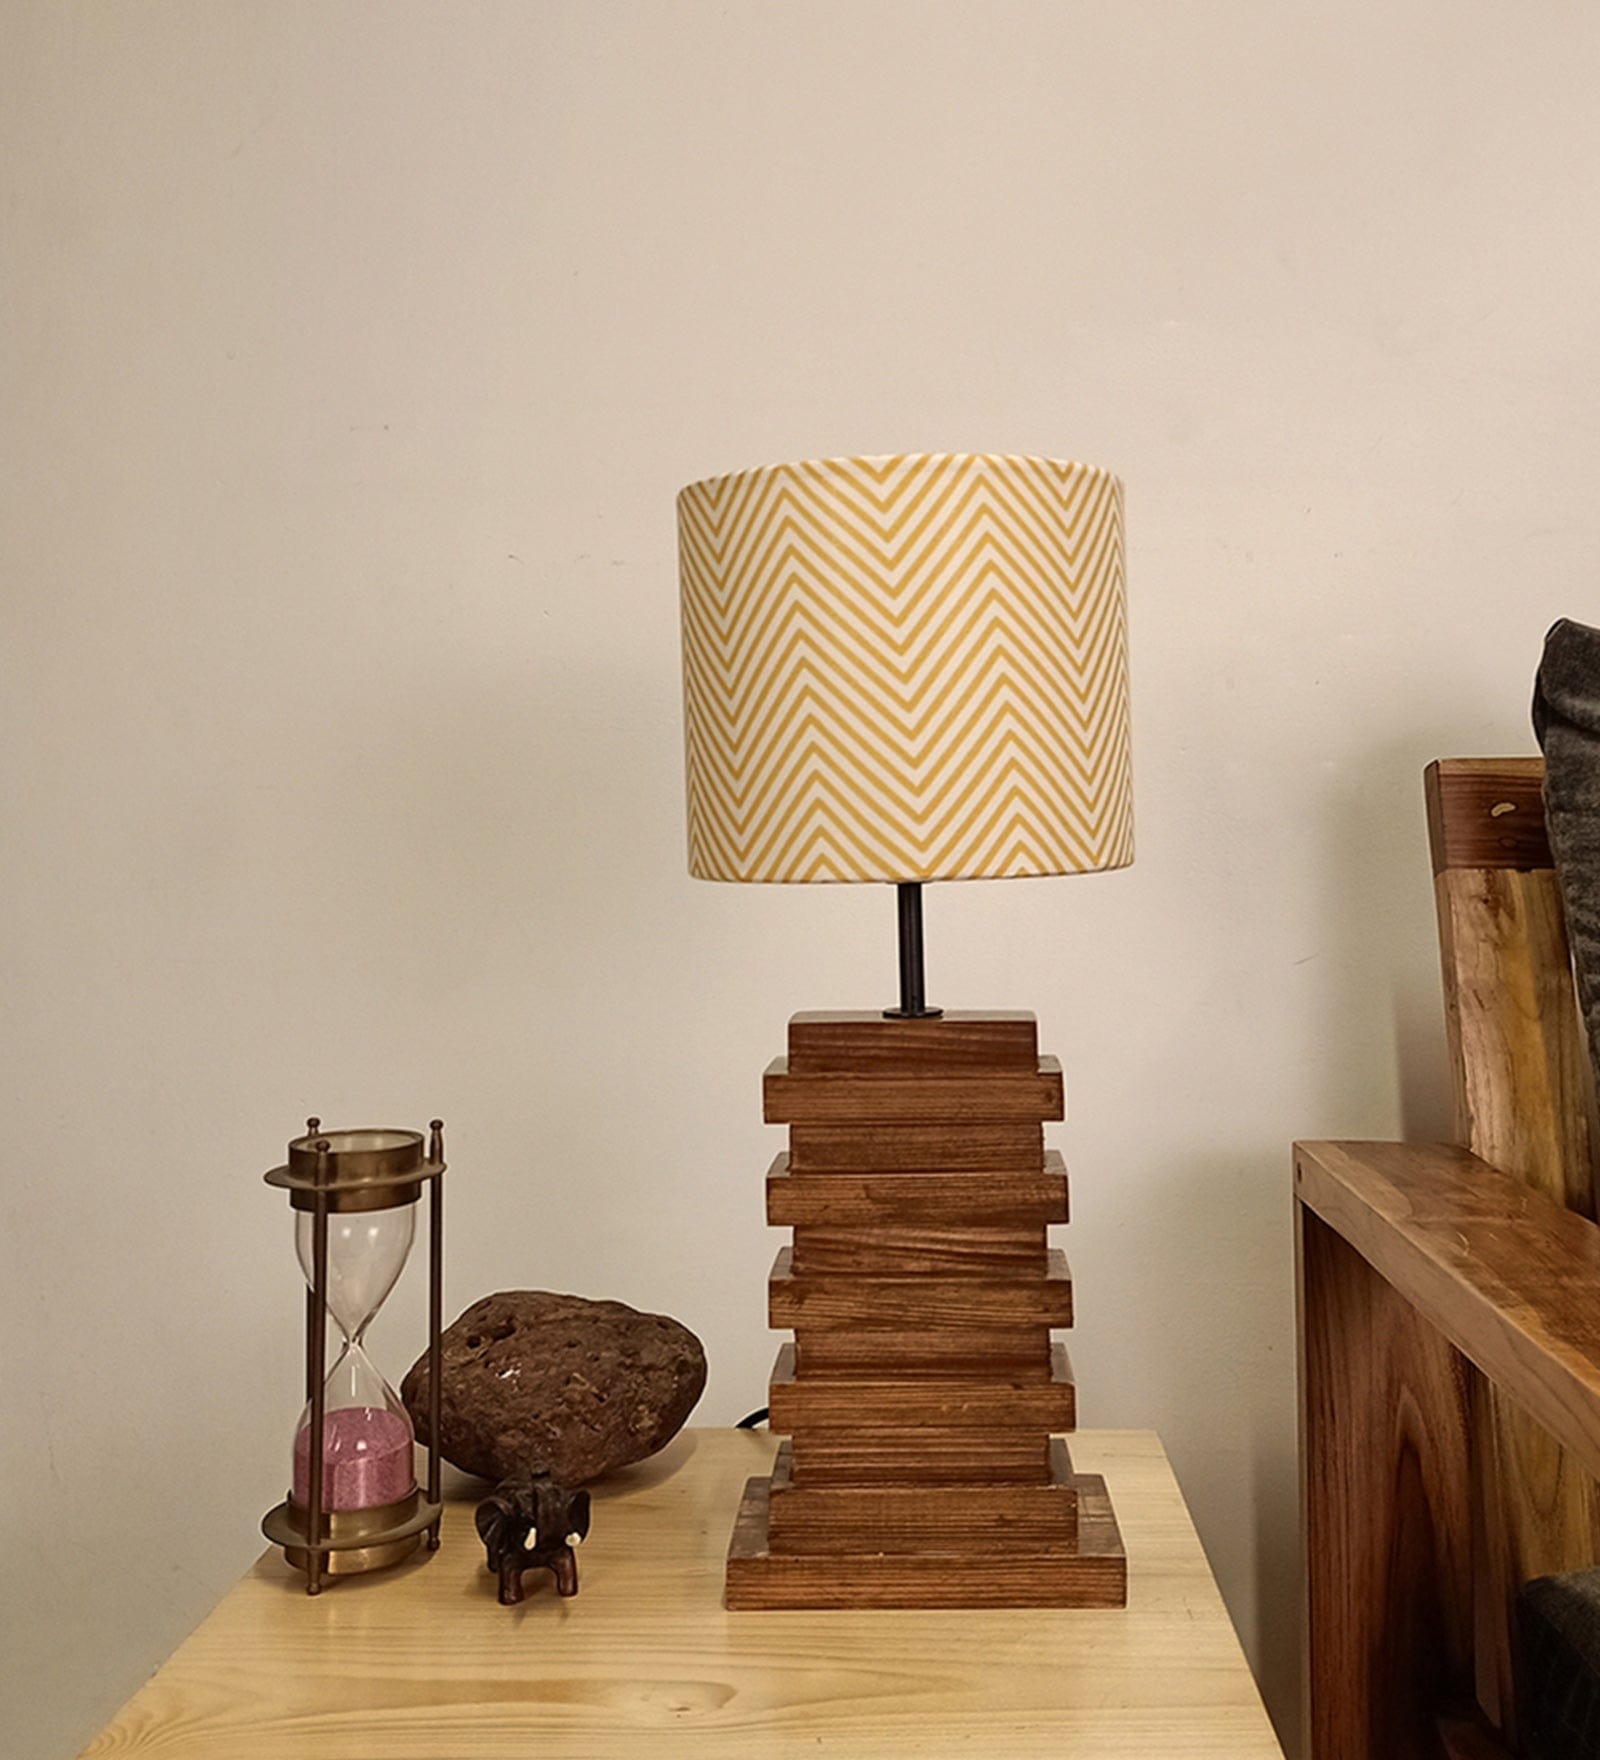 Truffle Beige Wooden Table Lamp with Red Printed Fabric Lampshade (BULB NOT INCLUDED)